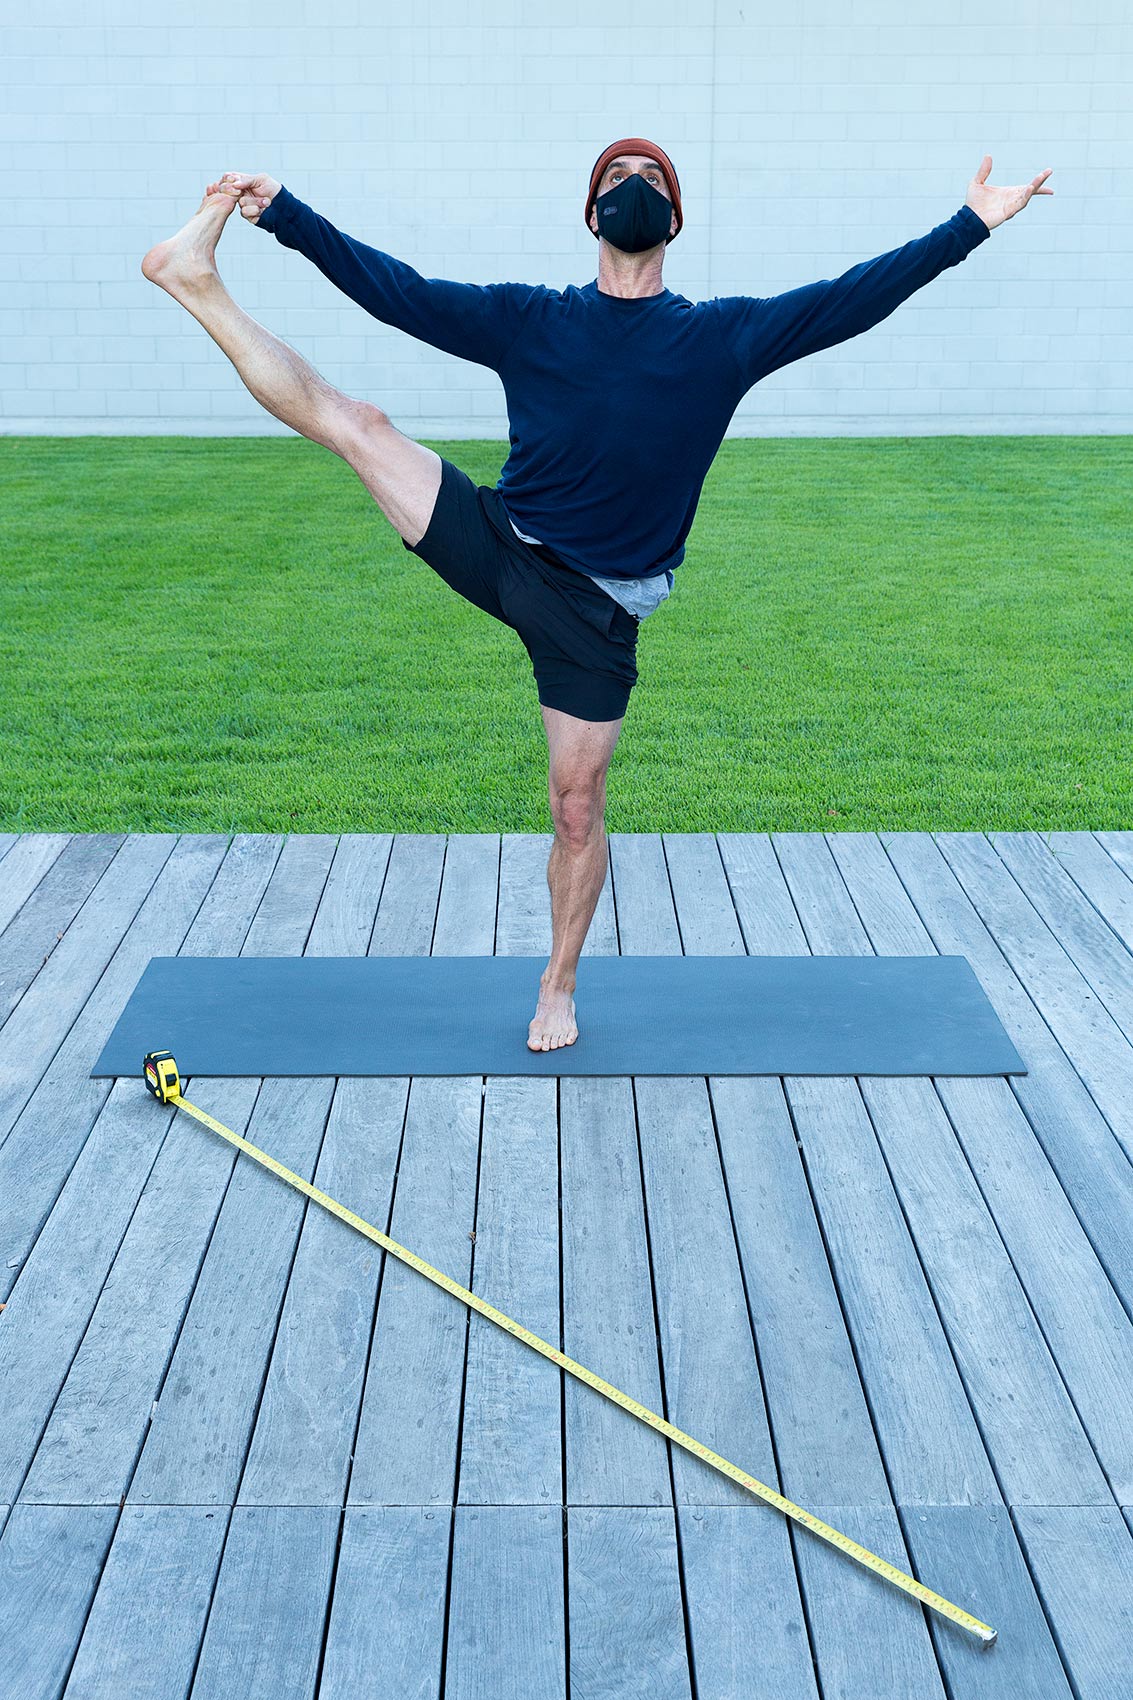 A man wearing a mask does a yoga pose on a wooden deck with a long tape measure as a symbol of Covid-19 social distance